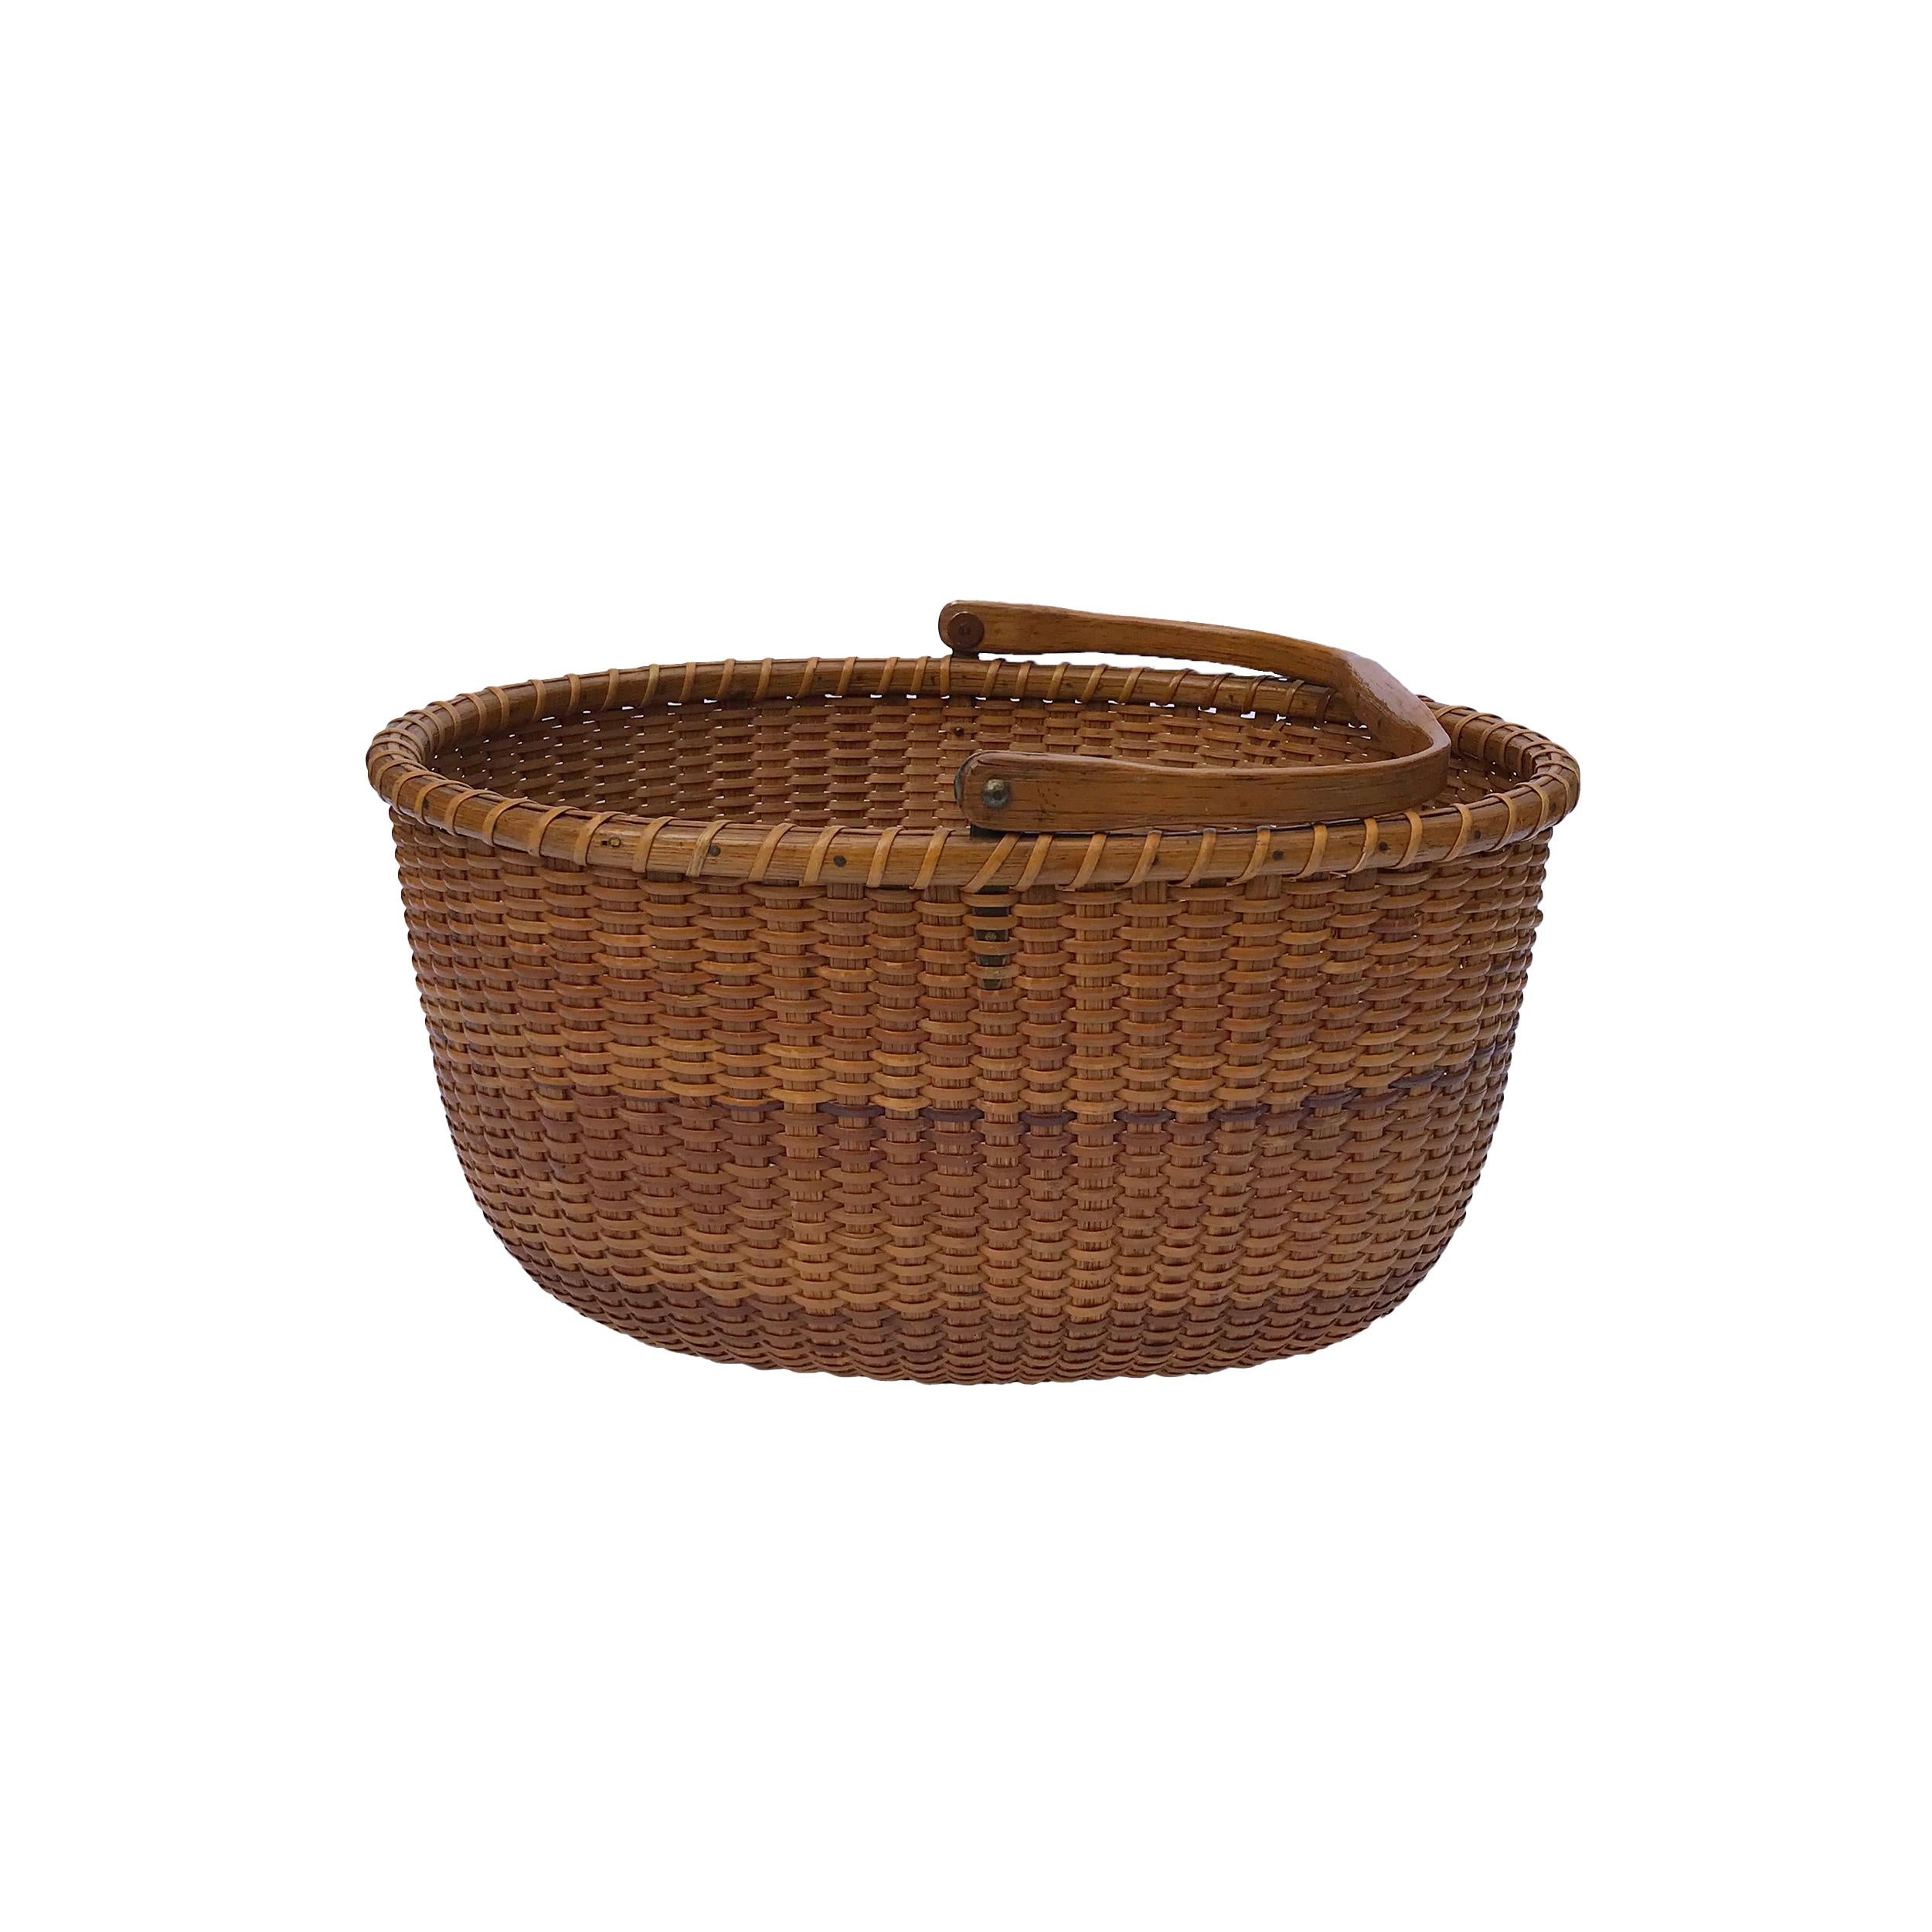 The basket has a warm honey patina, made with oak staves and swing handle, the handle has a brass pinned name plate attached to the top. The bottom plate is made out of Pine. Remnants of original paper label remains on the exterior bottom
Made by